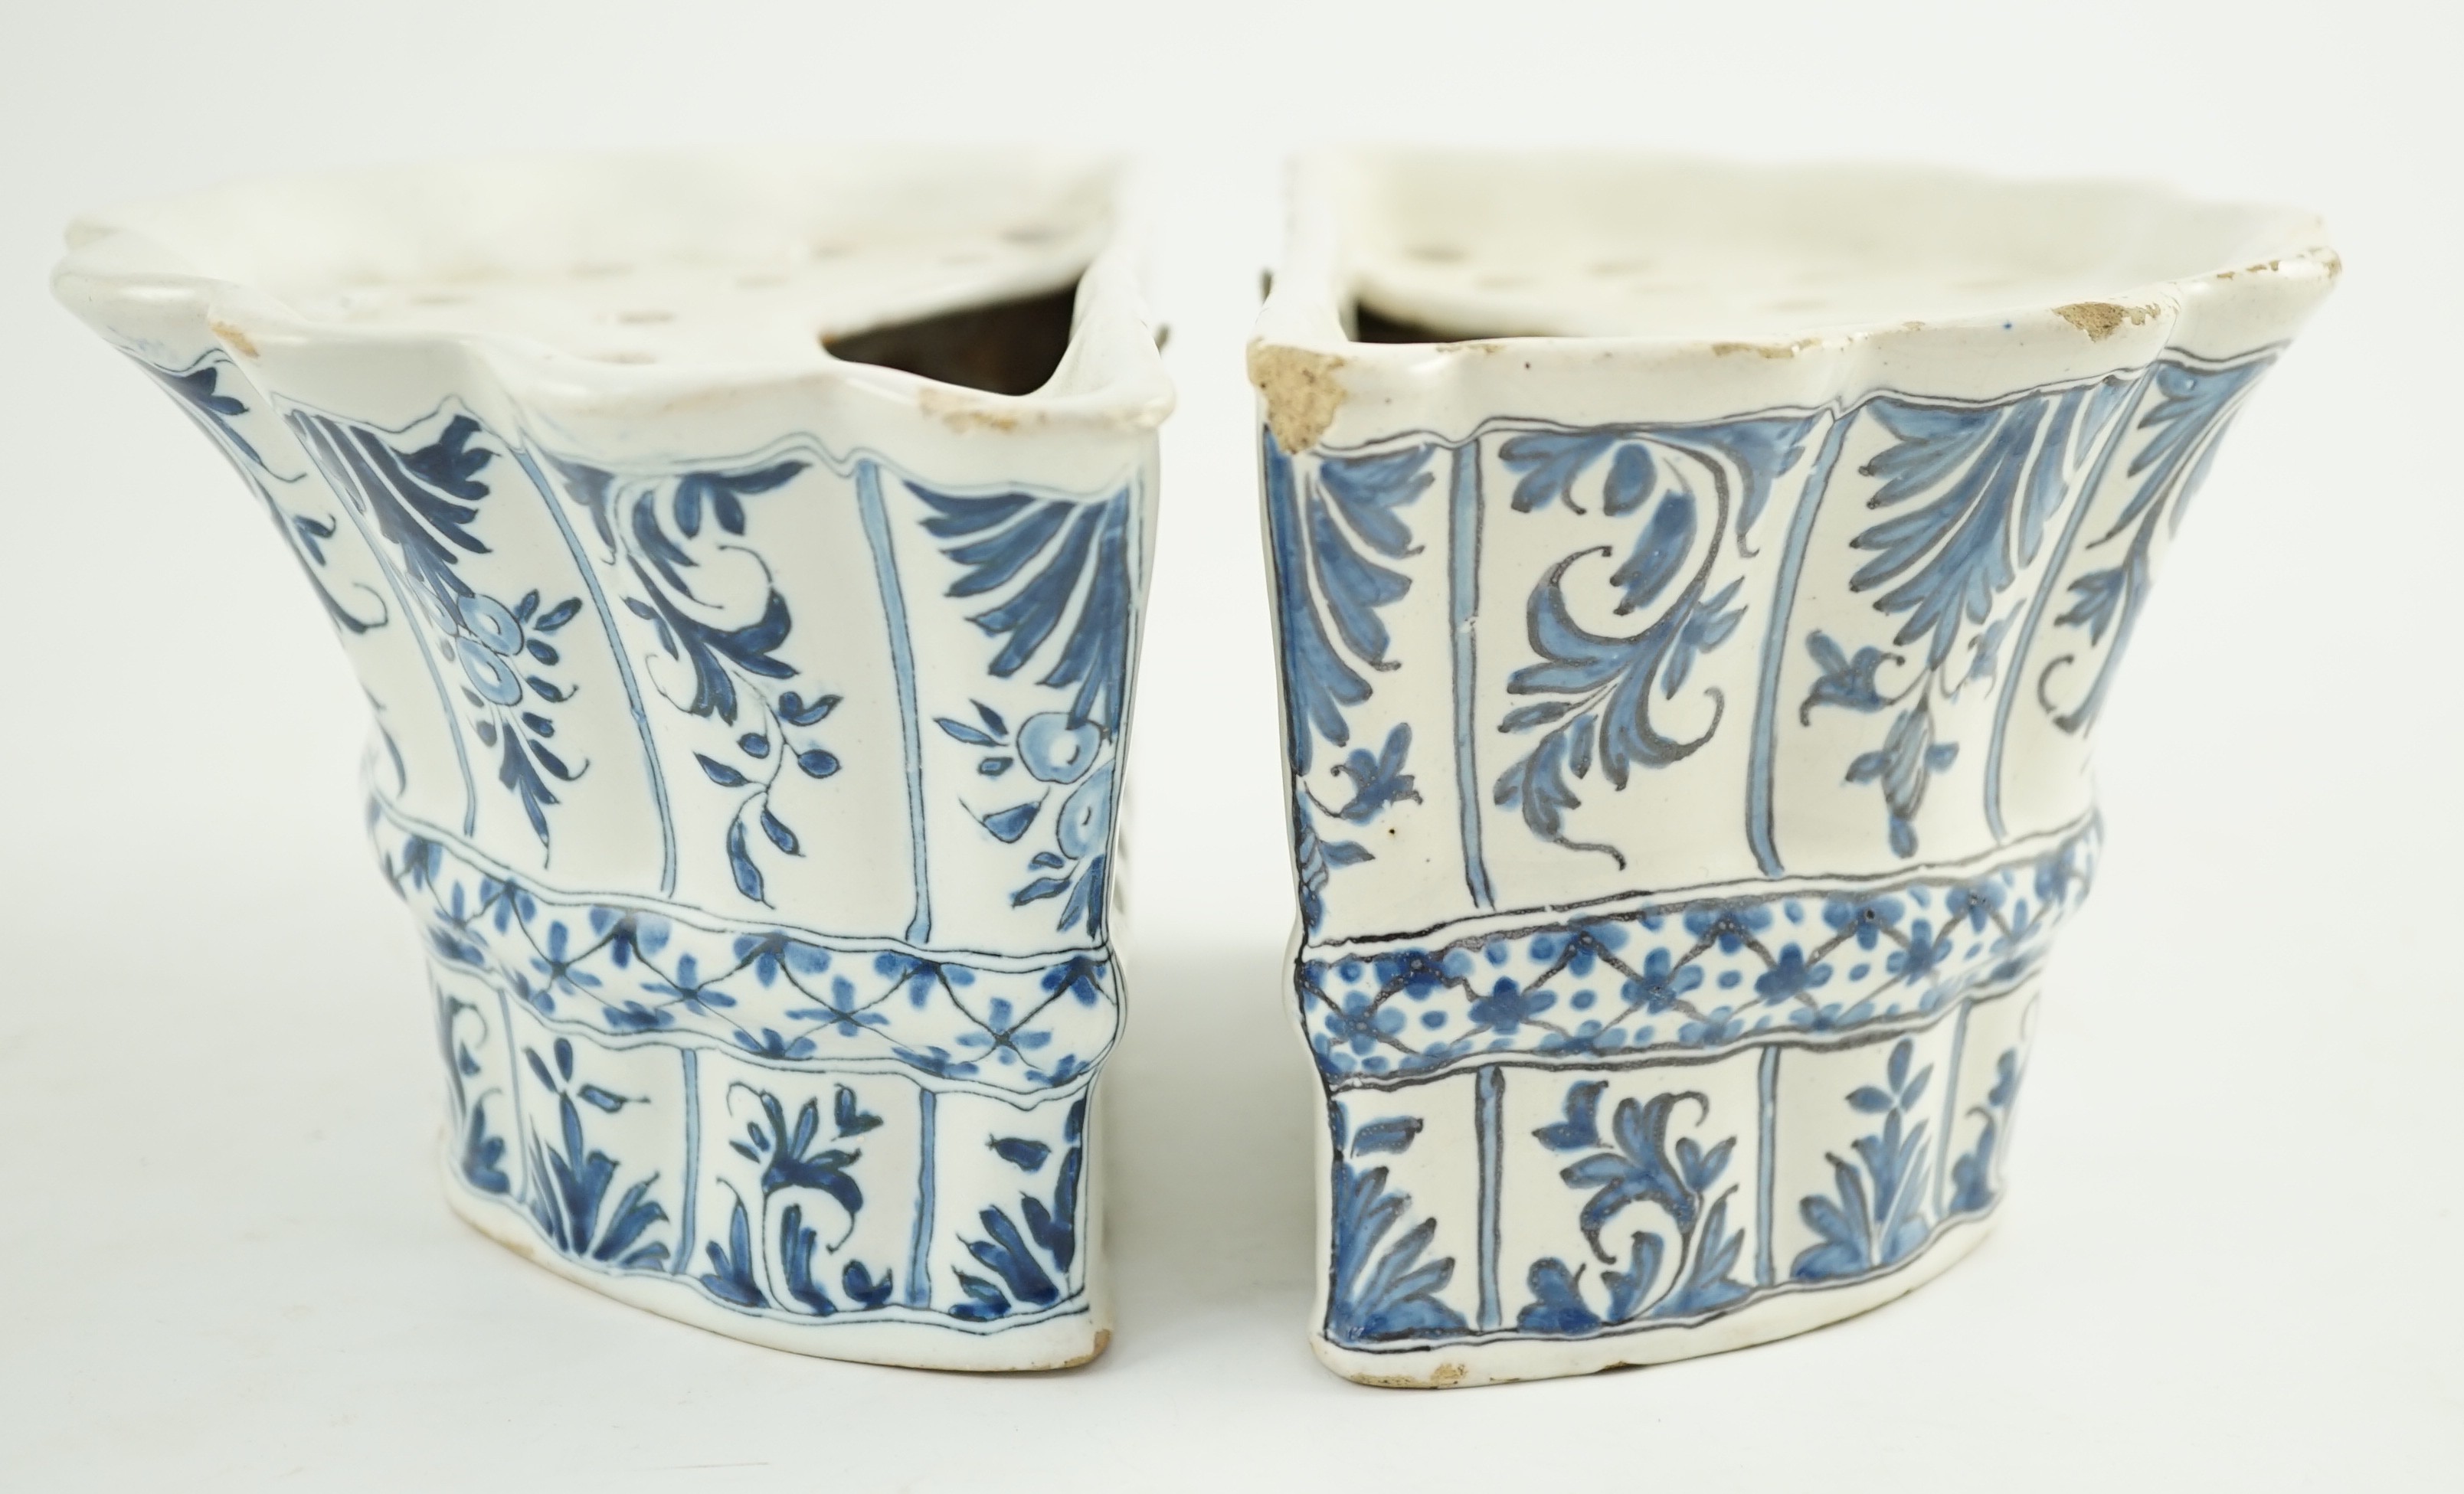 Two similar 18th century Delft blue and white hanging bough pots, 18.3cm wide